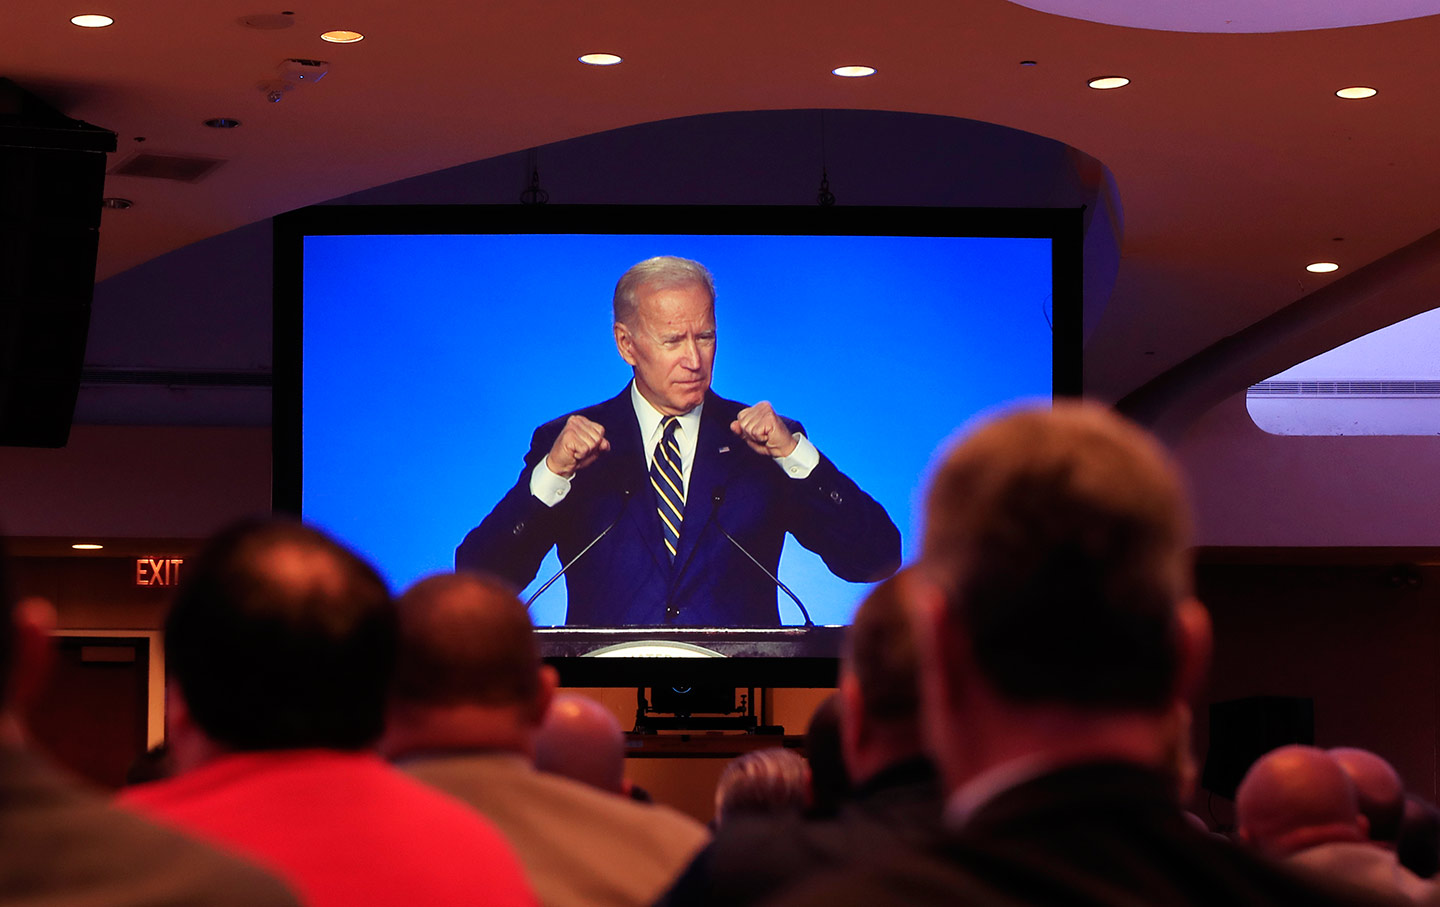 Joe Biden speaking at the International Brotherhood of Electrical Workers construction and maintenance conference